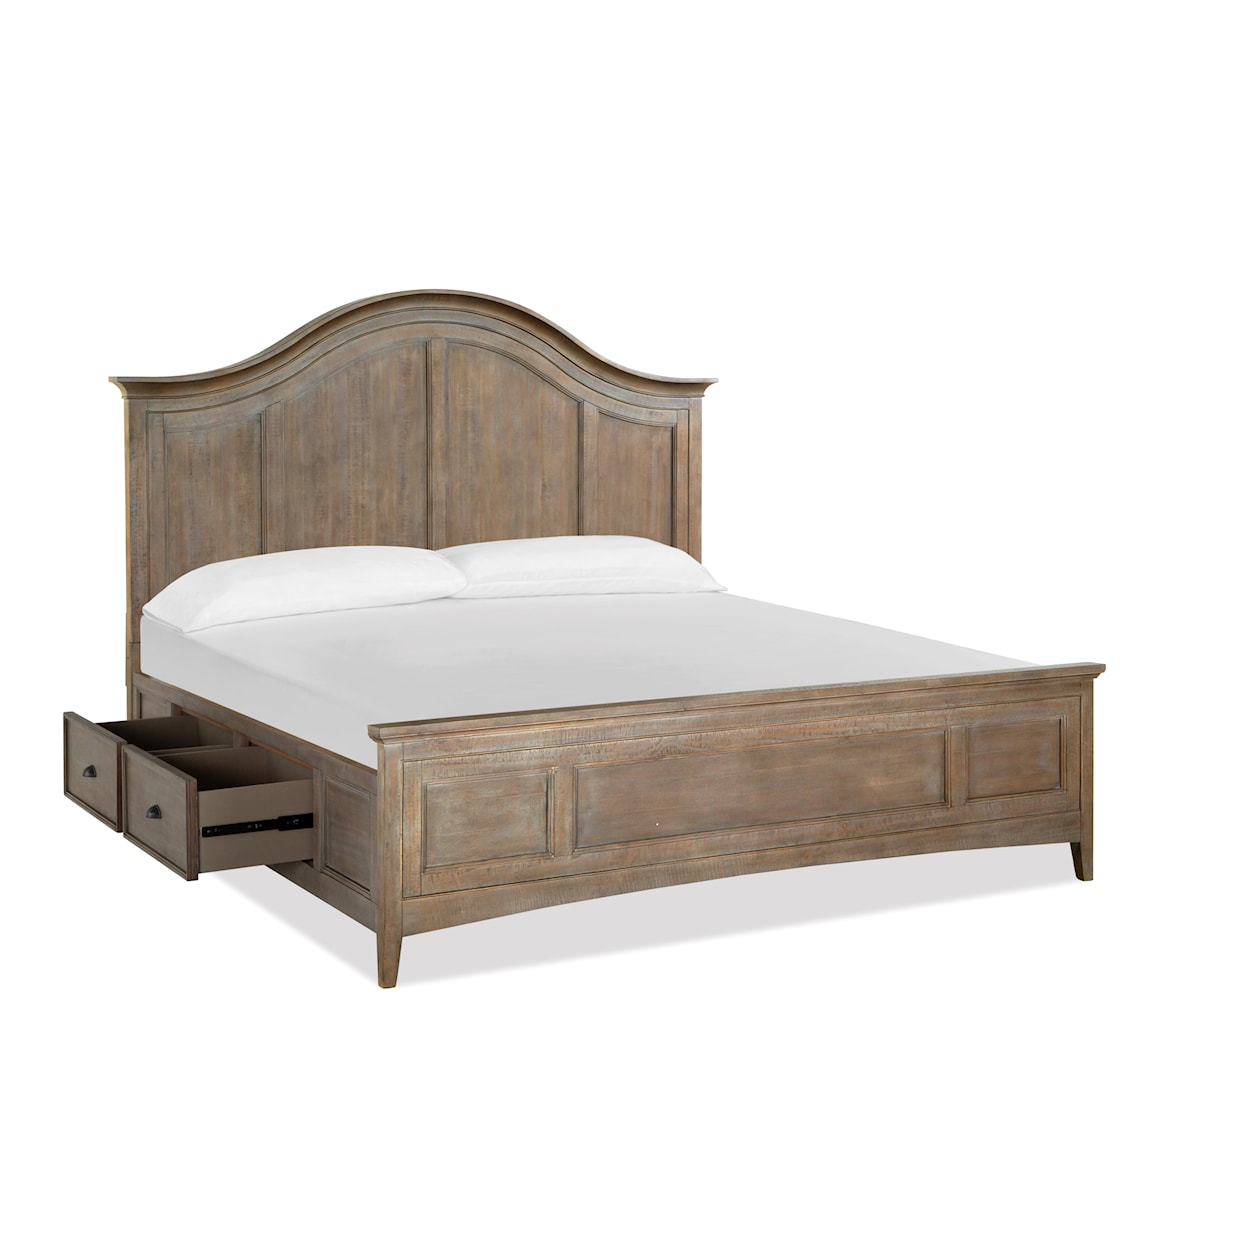 Magnussen Home Paxton Place Bedroom California King Arched Storage Bed 